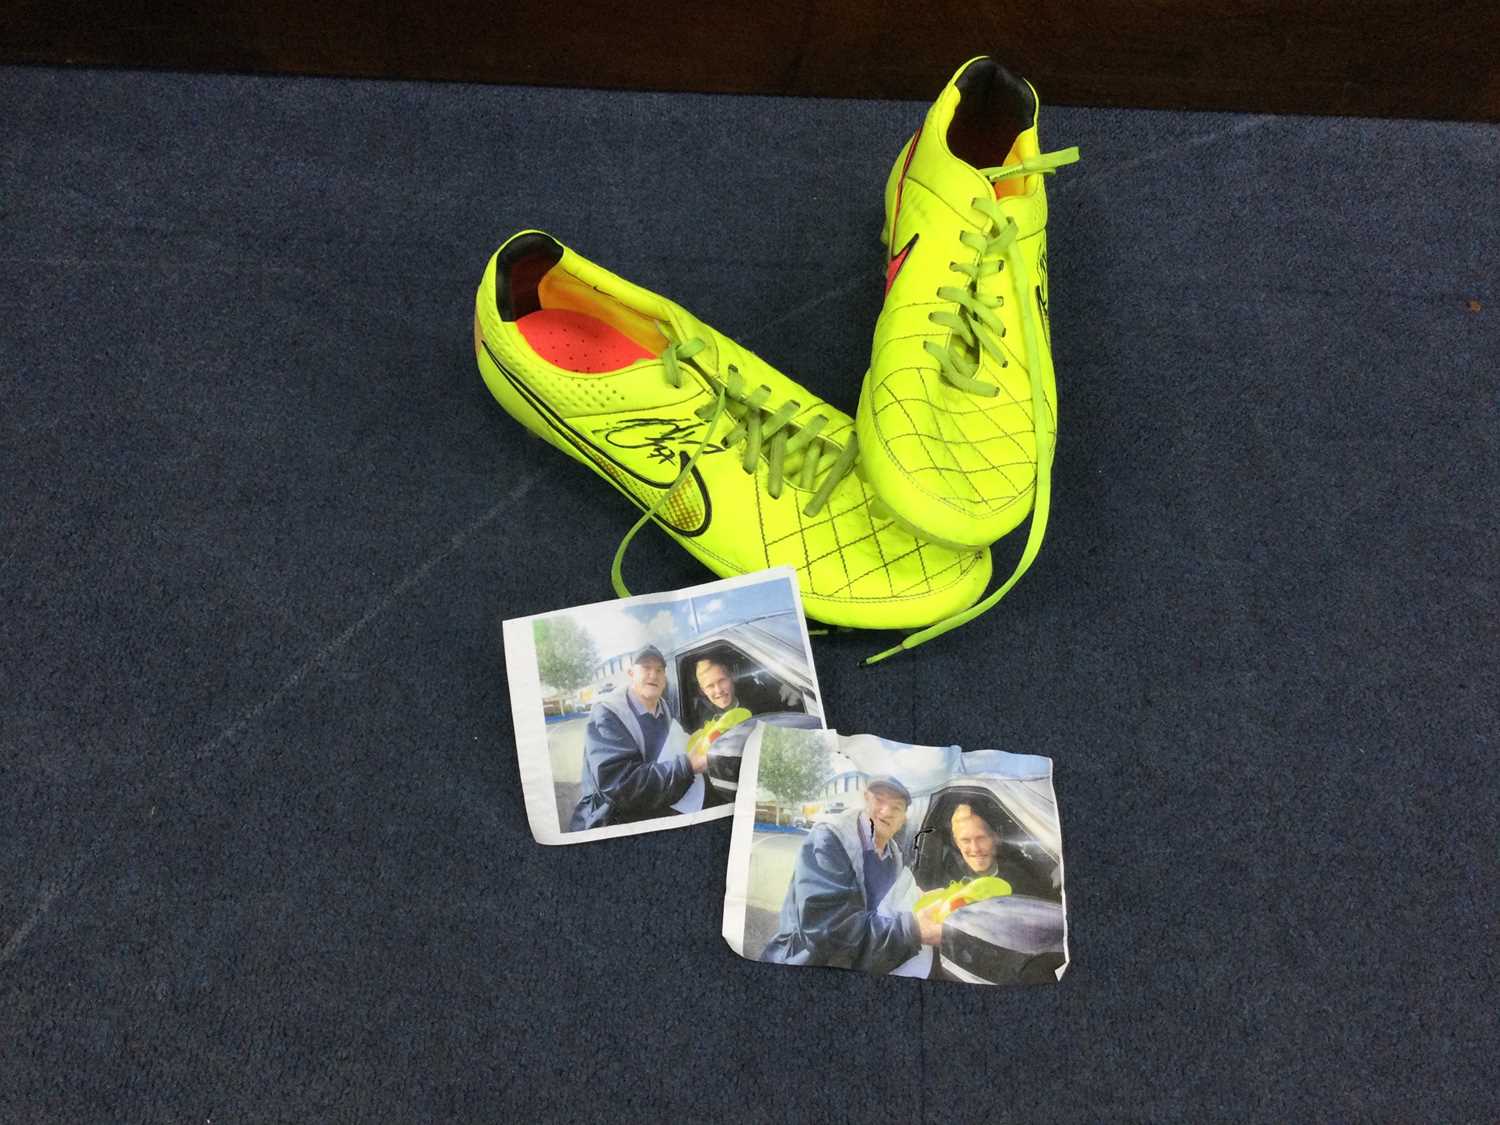 Lot 210 - A PAIR OF SIGNED FOOTBALL BOOTS